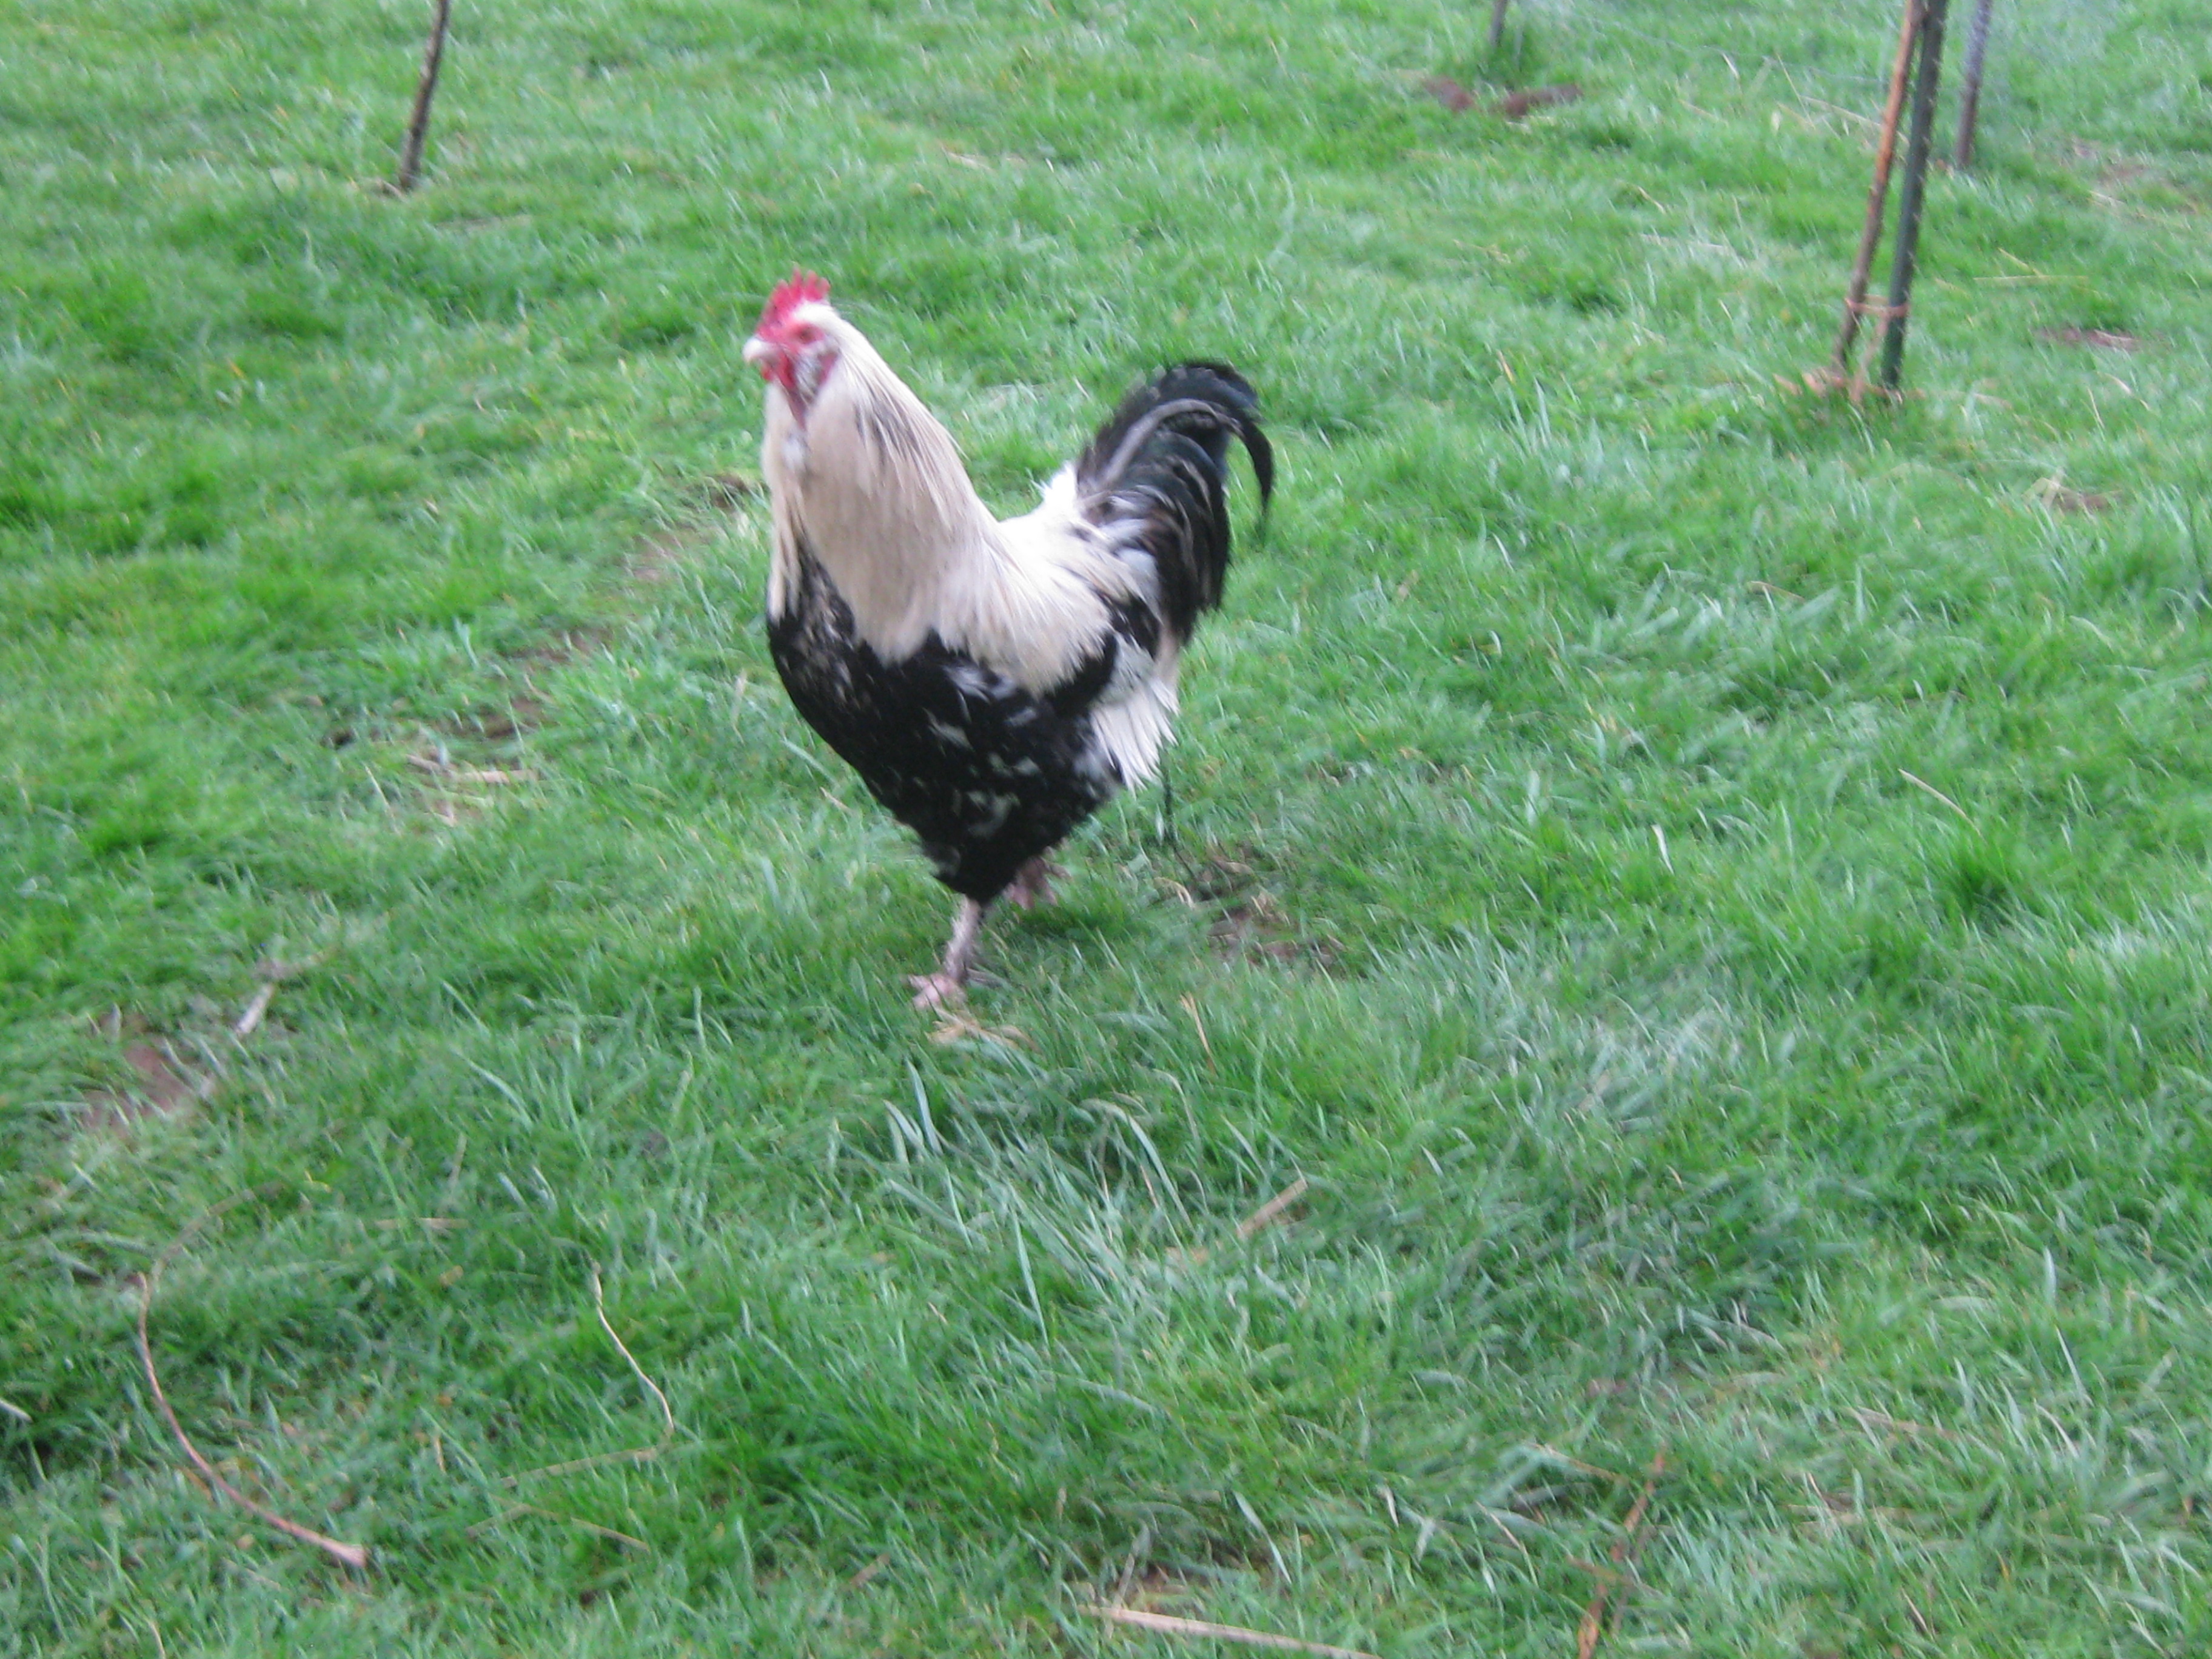 "Oldy" he is the oldest rooster we have at 9 years.